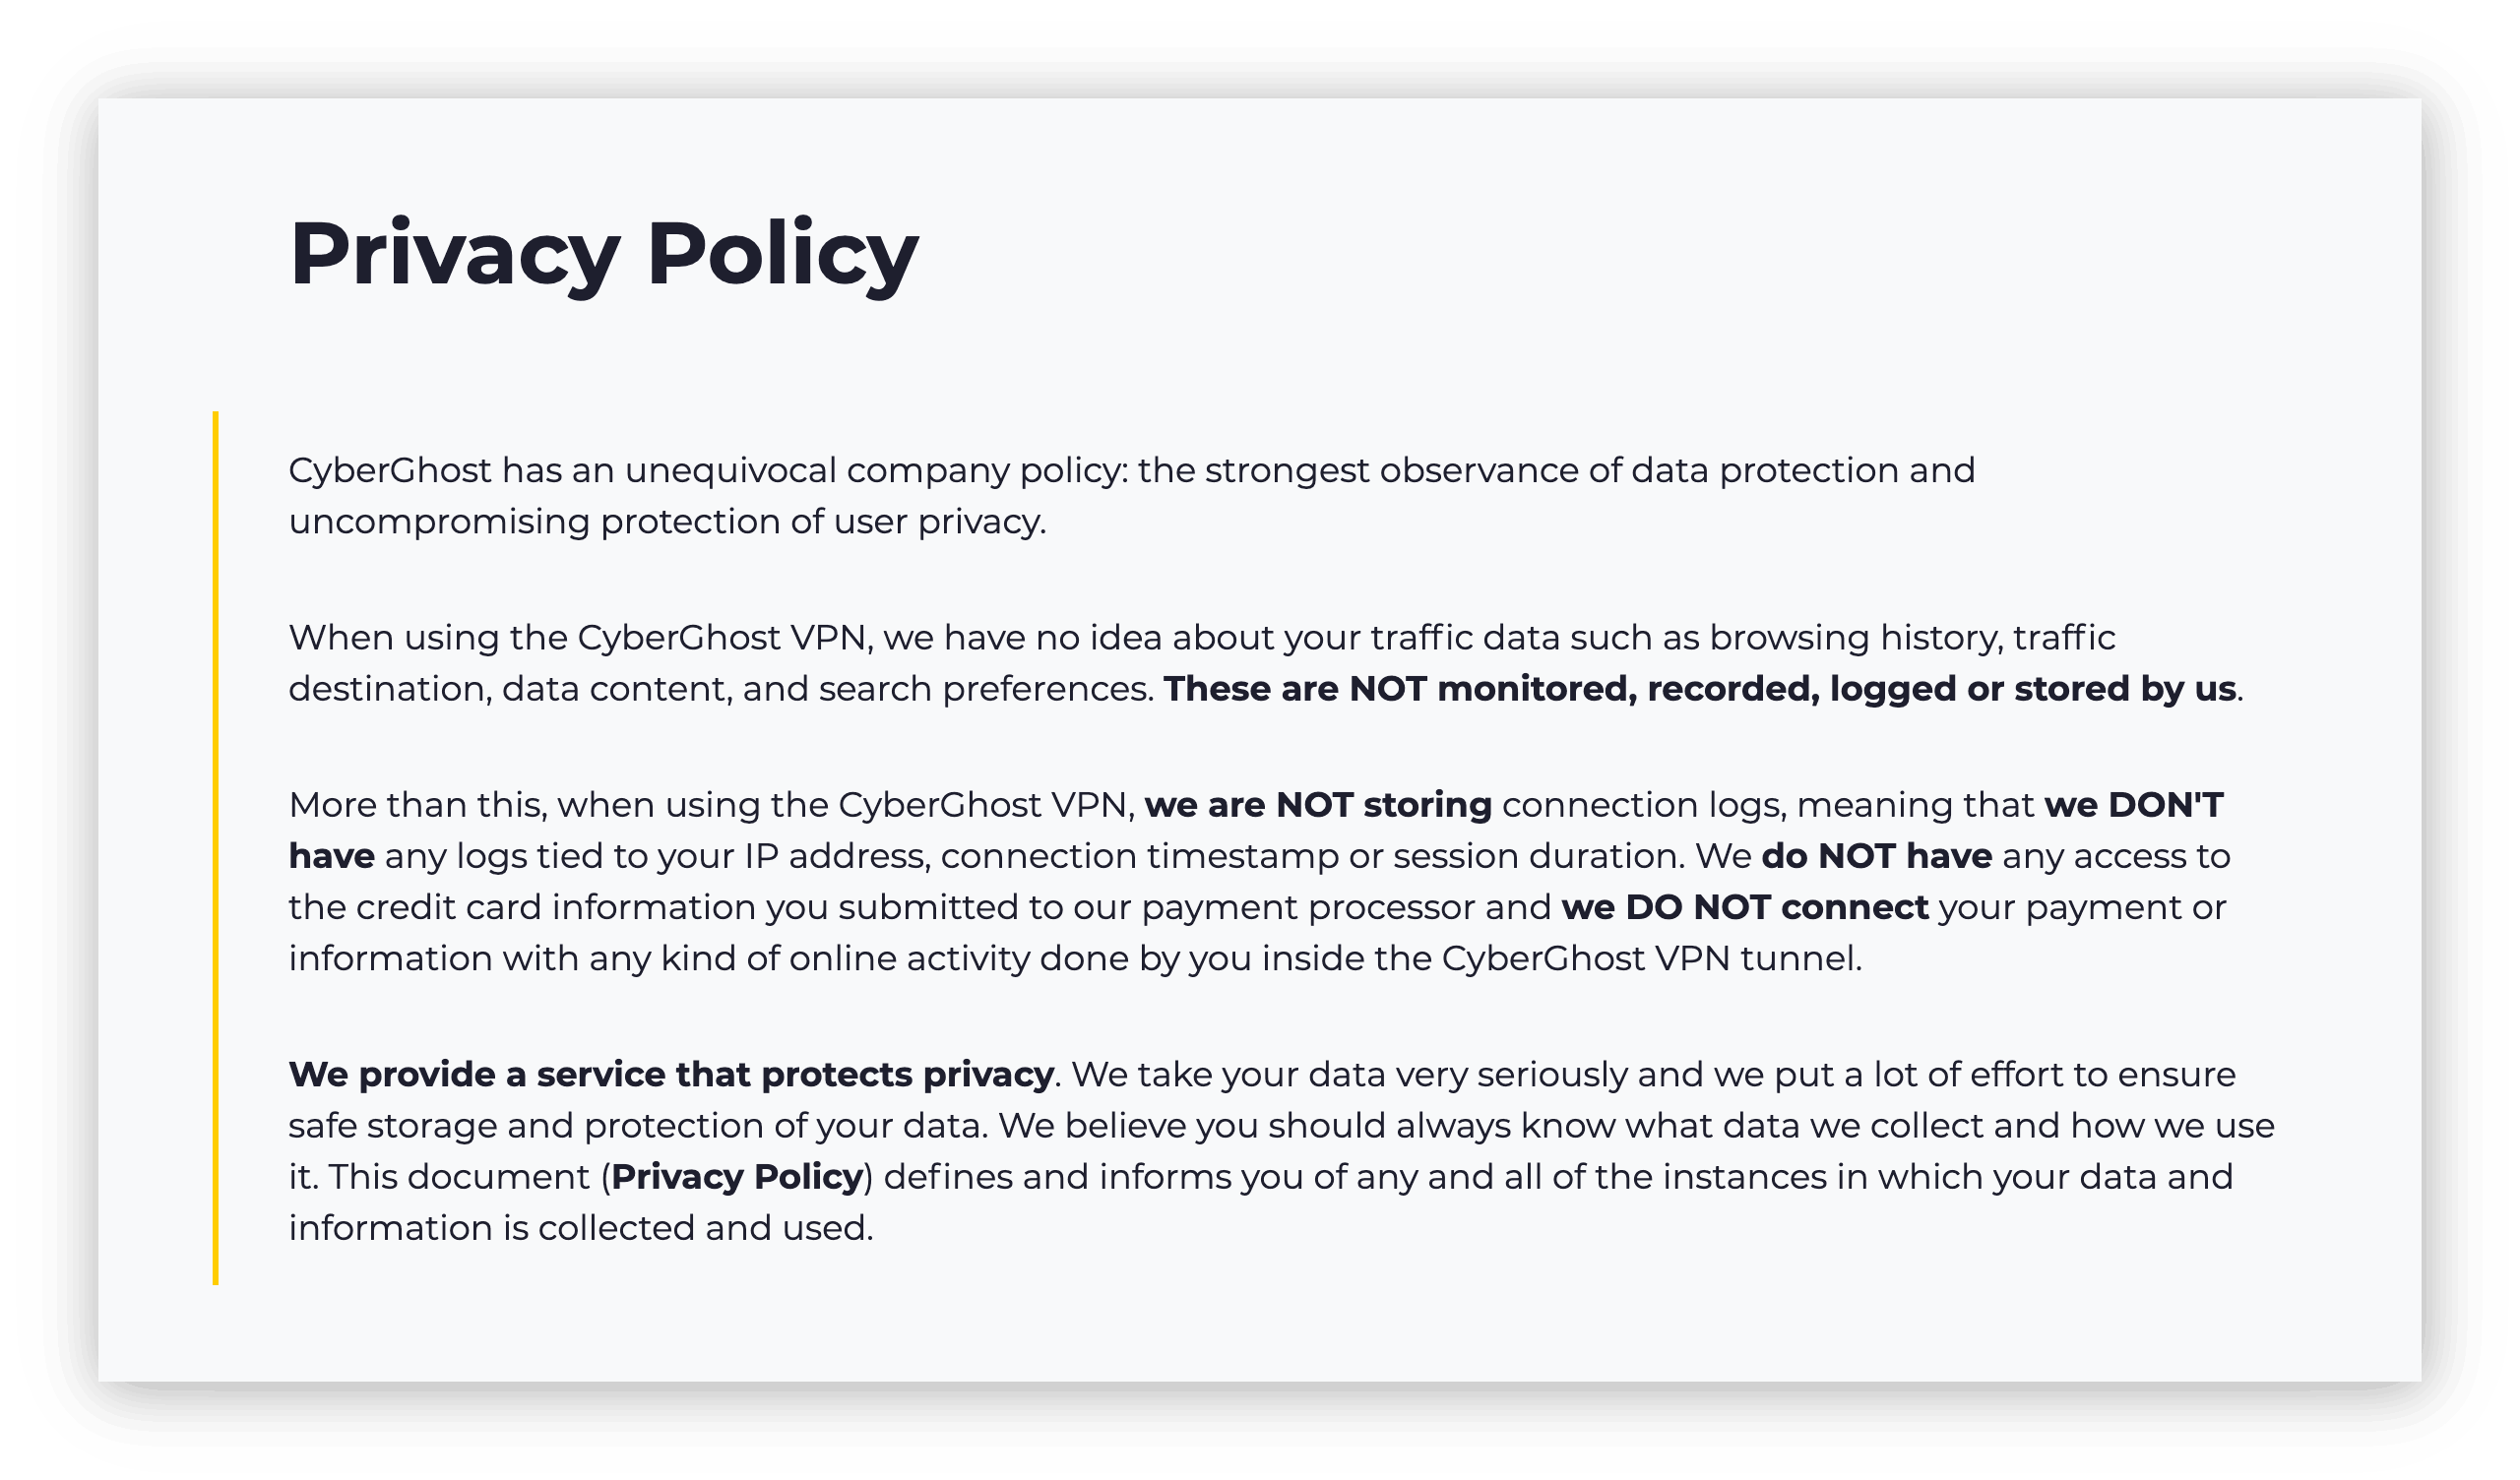 Screenshot from the CyberGhost Privacy Policy